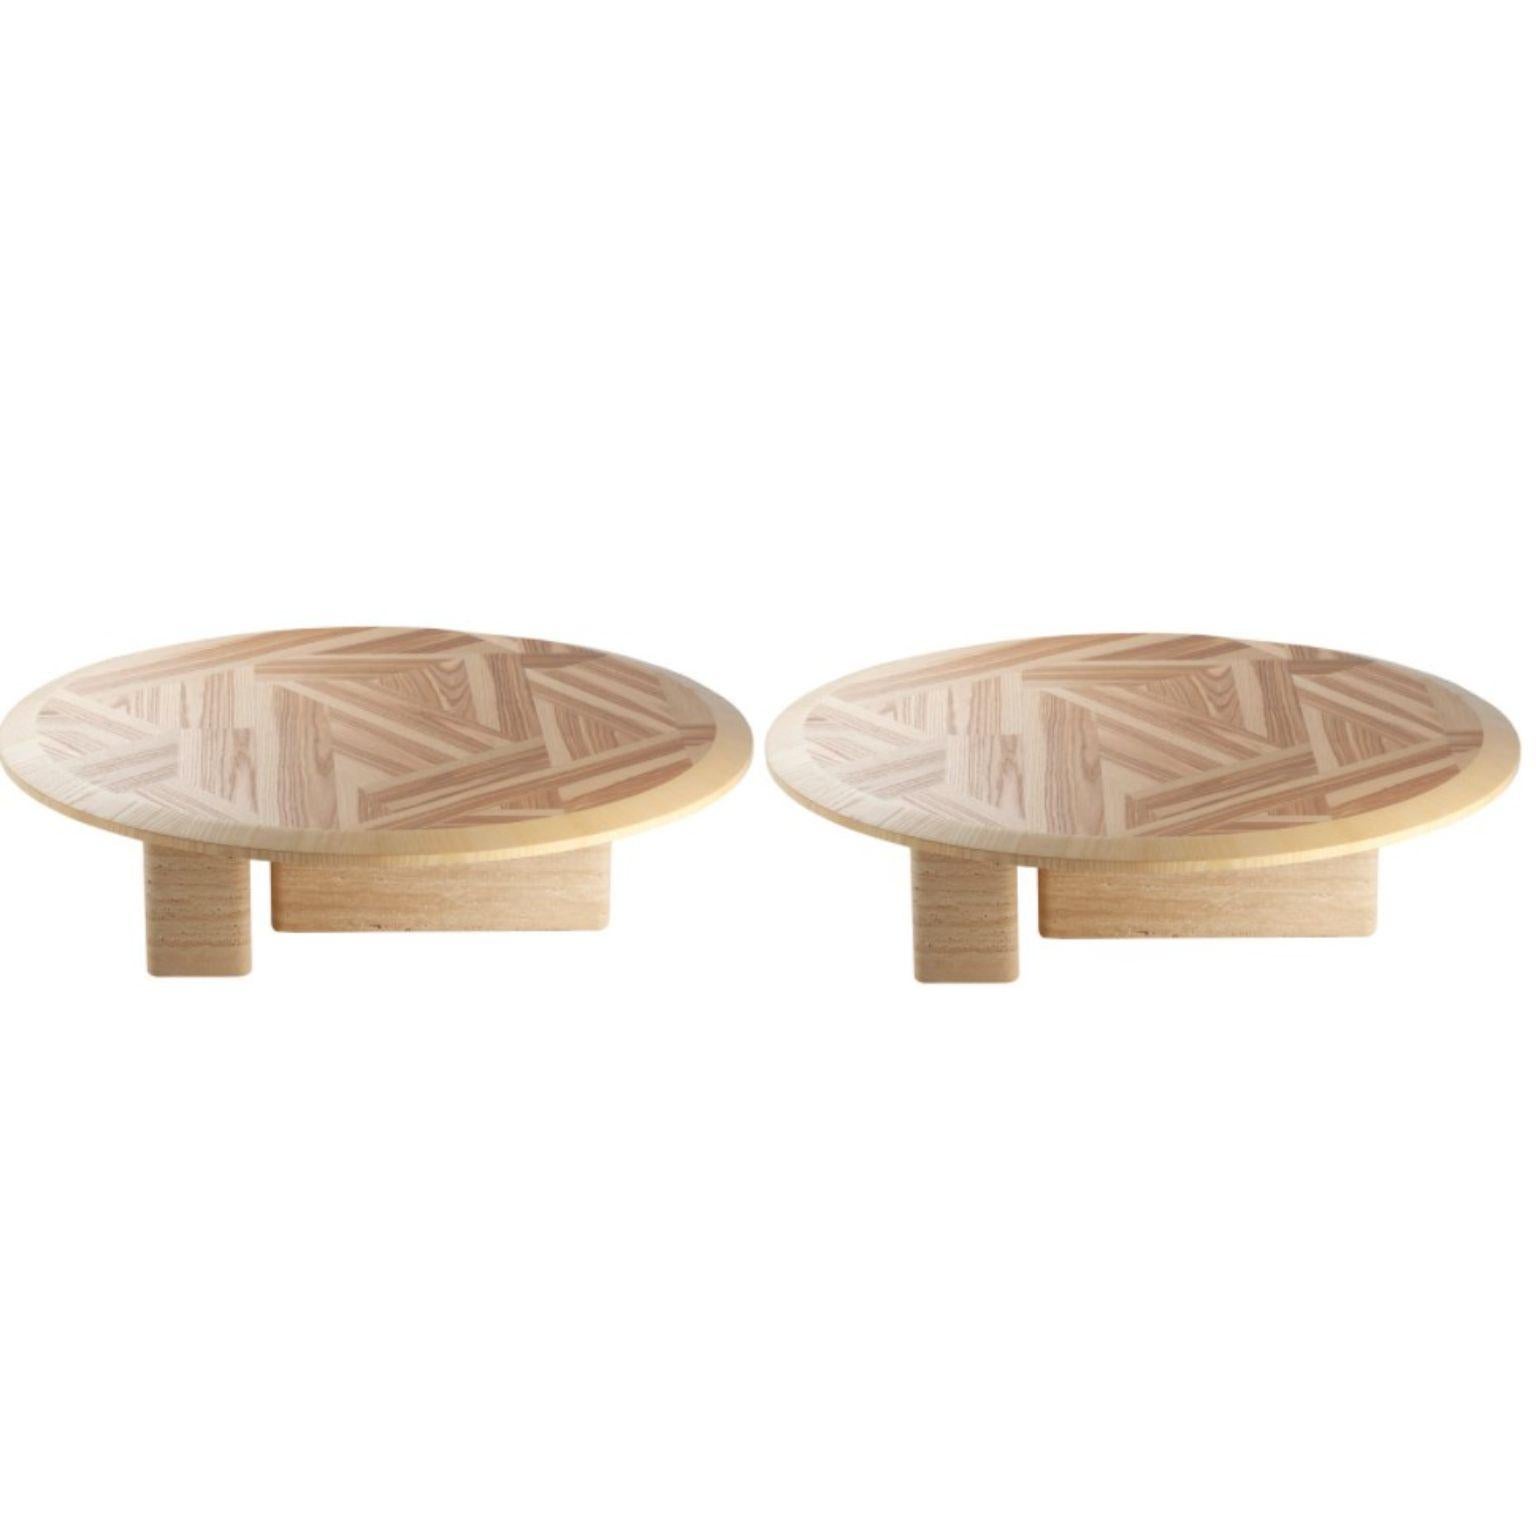 Set of 2 L’anamour center tables by Dooq
Dimensions: D 110 x W 110 x H 30 cm
Materials: 
Top: Natural or nude olive ash
Base: Natural travertine or nude lacquered wood

Other options available.

L’anamour is a set of coffee and side tables,